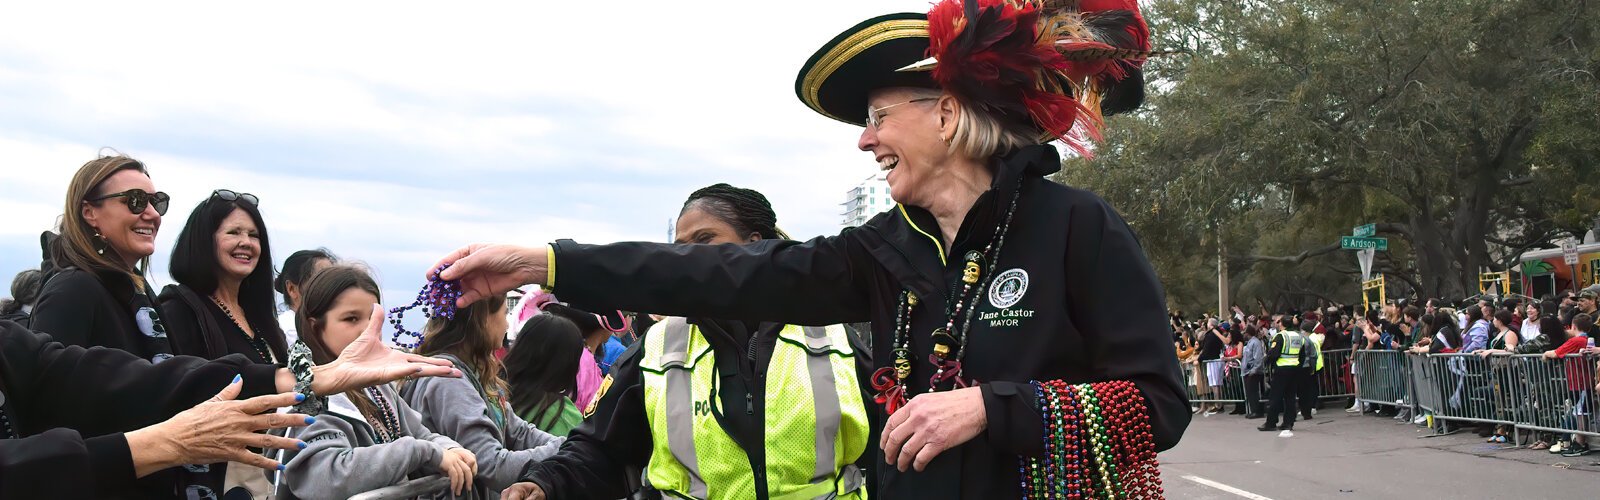 Tampa Mayor Jane Castor hands out beads during the Gasparilla parade of January 28. Earlier, she had relinquished the key of the city to Ye Mystic Krewe of Gasparilla, the invading pirates.